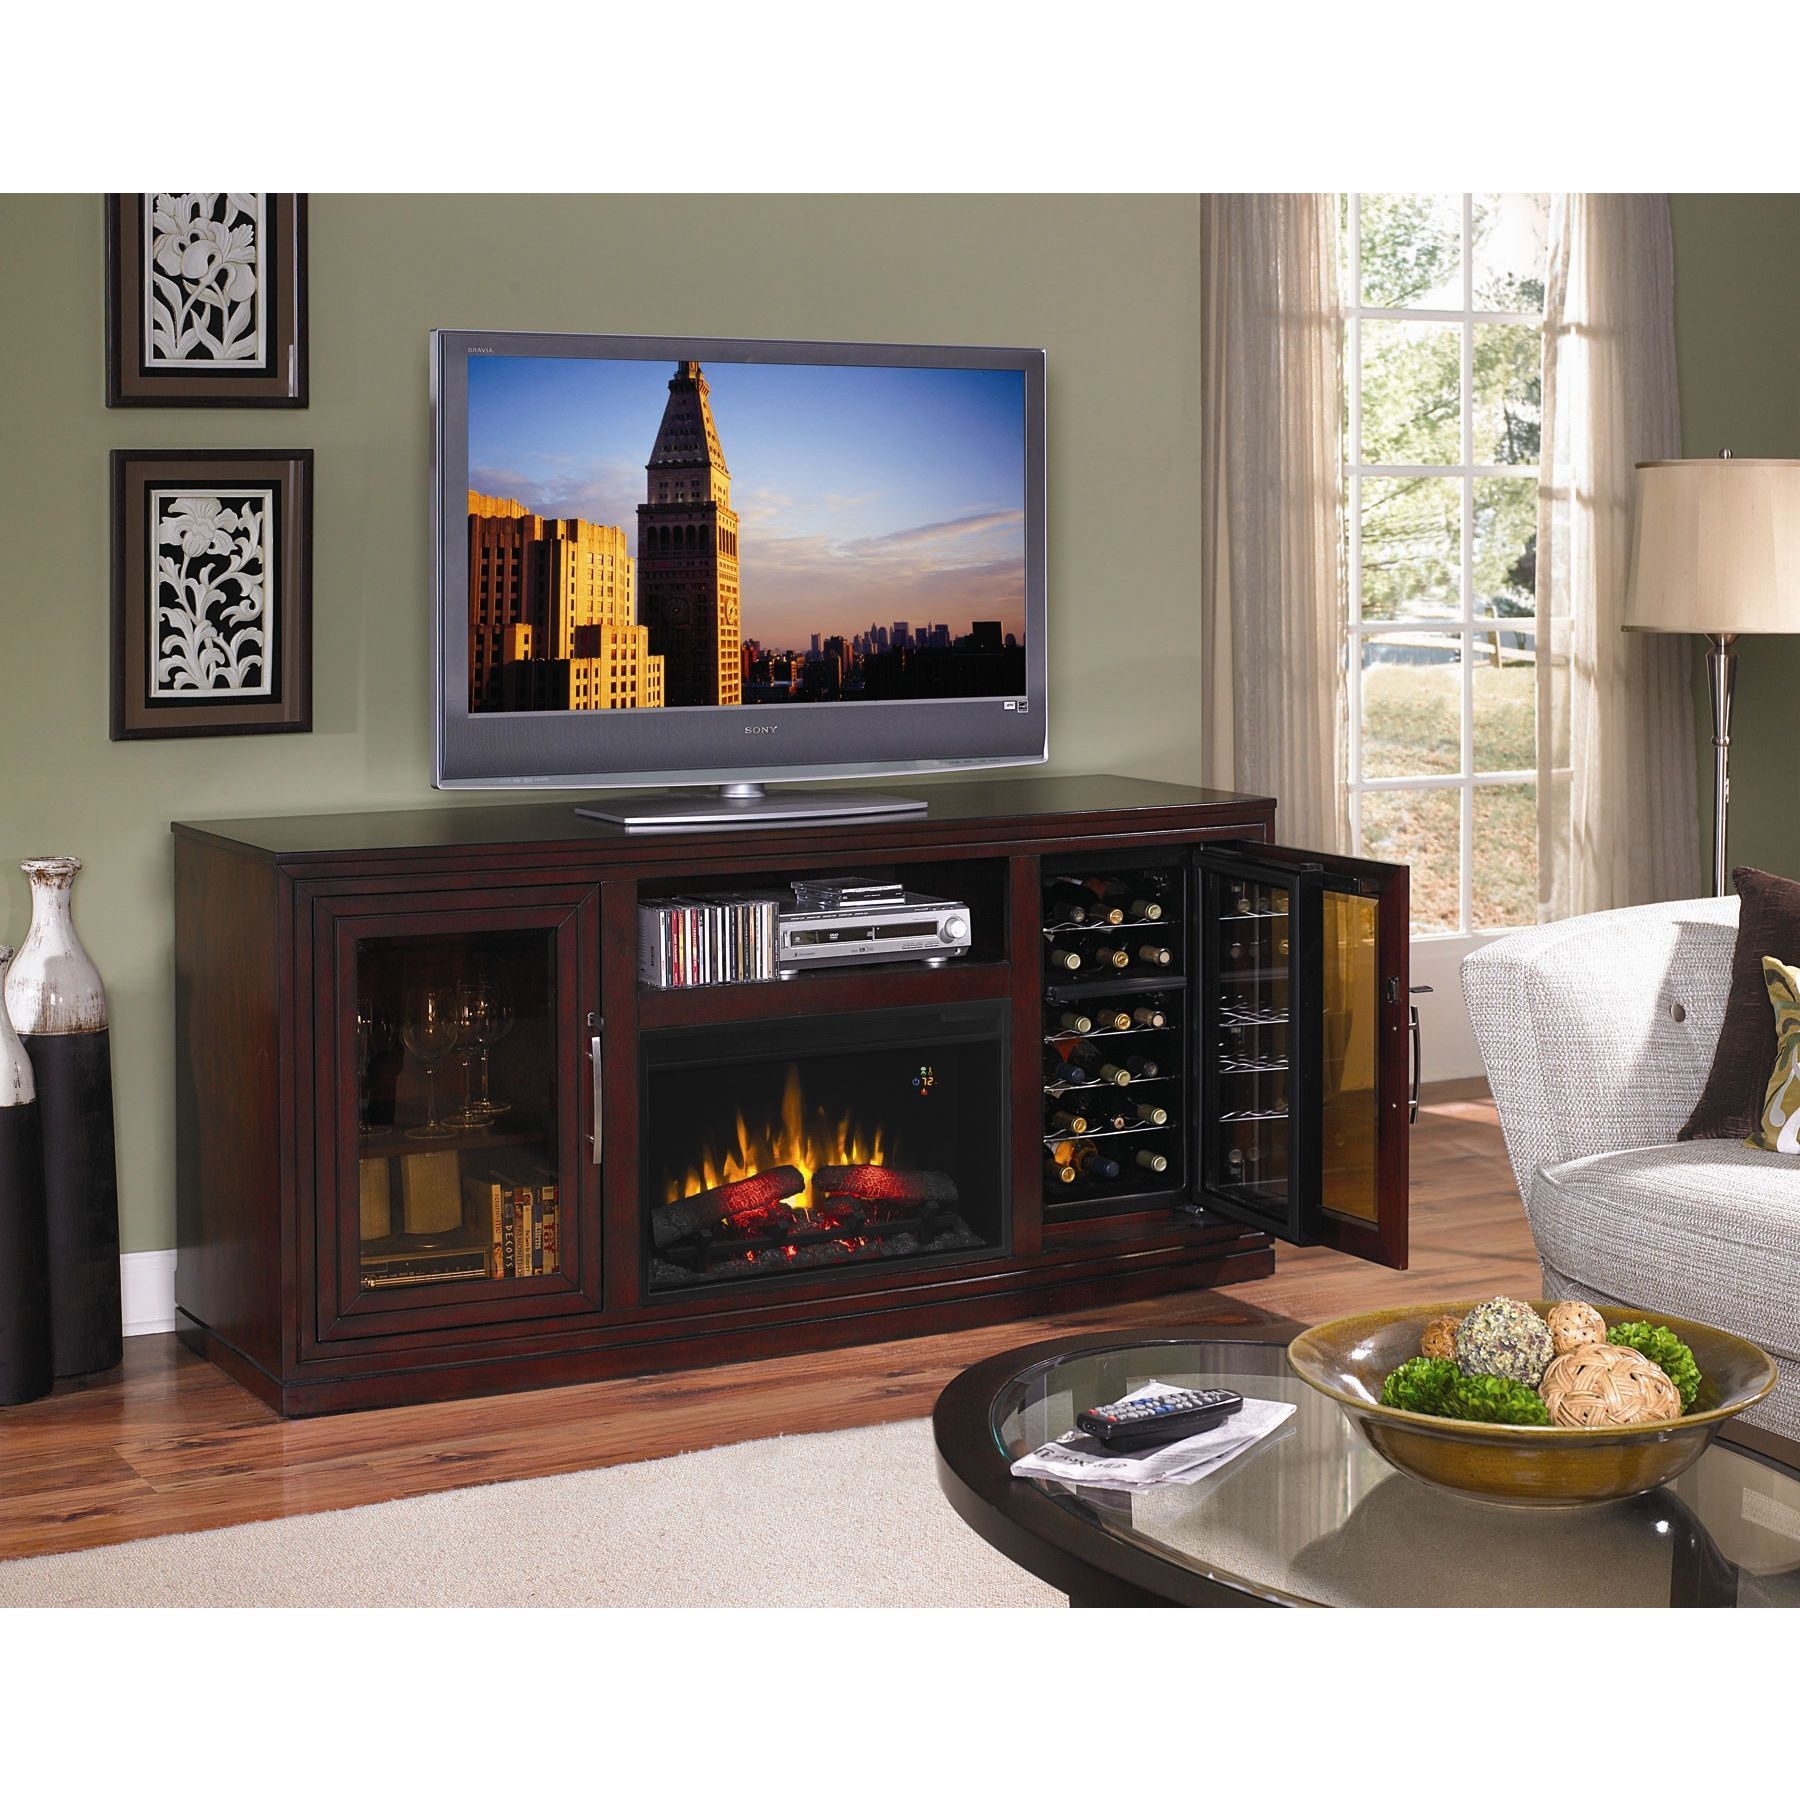 Tv Stand, Fireplace, Wine Rack | For The Home In 2019 | Pinterest Throughout Casey Umber 66 Inch Tv Stands (Photo 1 of 30)